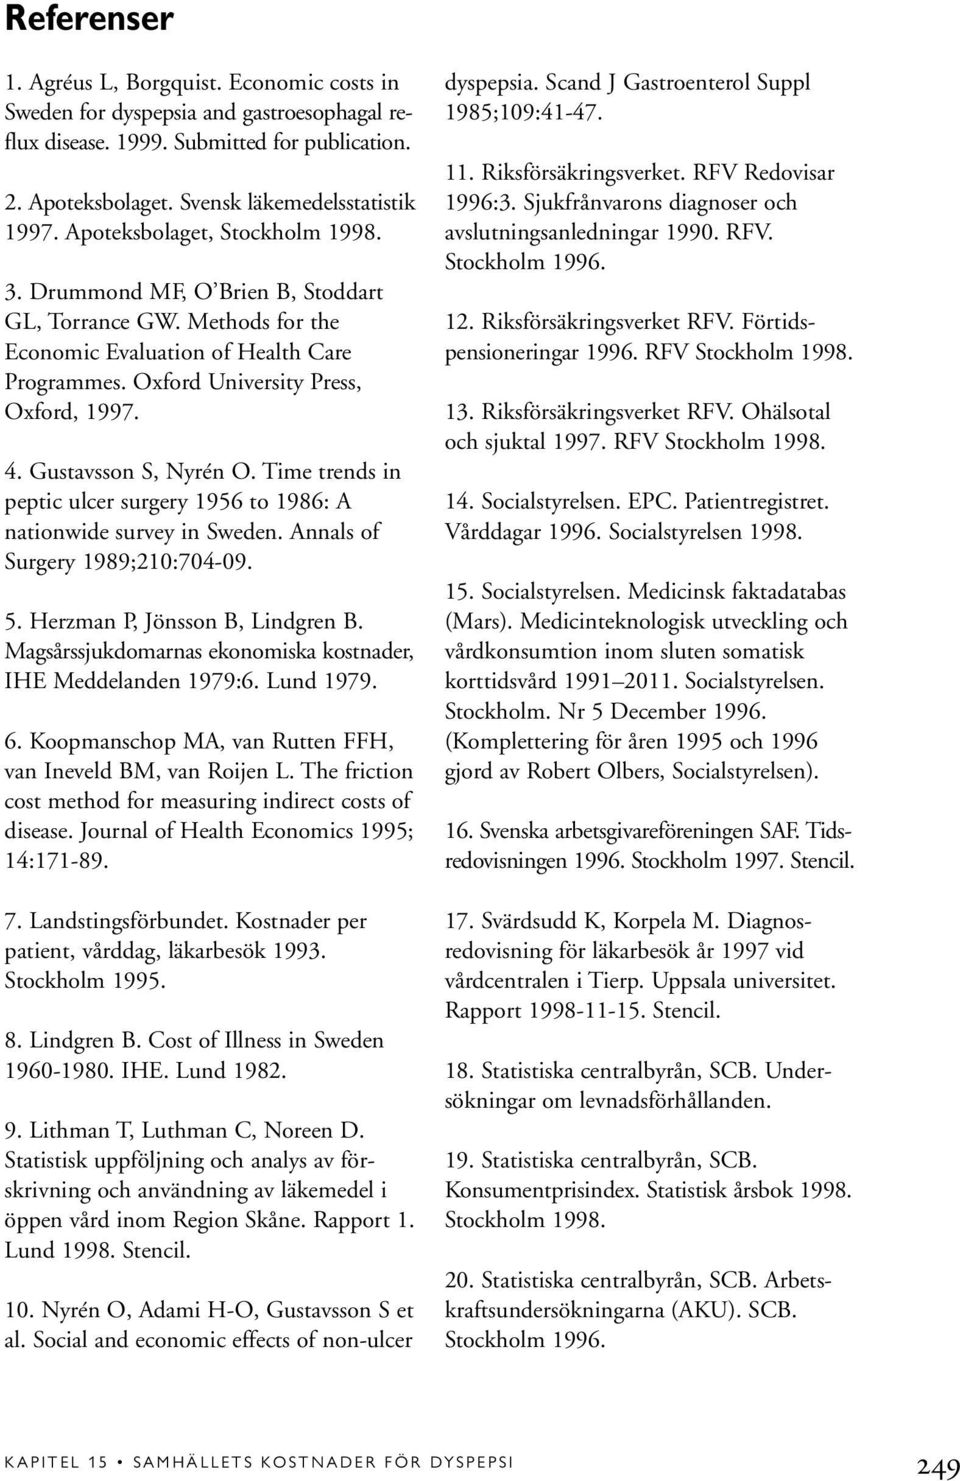 Gustavsson S, Nyrén O. Time trends in peptic ulcer surgery 1956 to 1986: A nationwide survey in Sweden. Annals of Surgery 1989;210:704-09. 5. Herzman P, Jönsson B, Lindgren B.